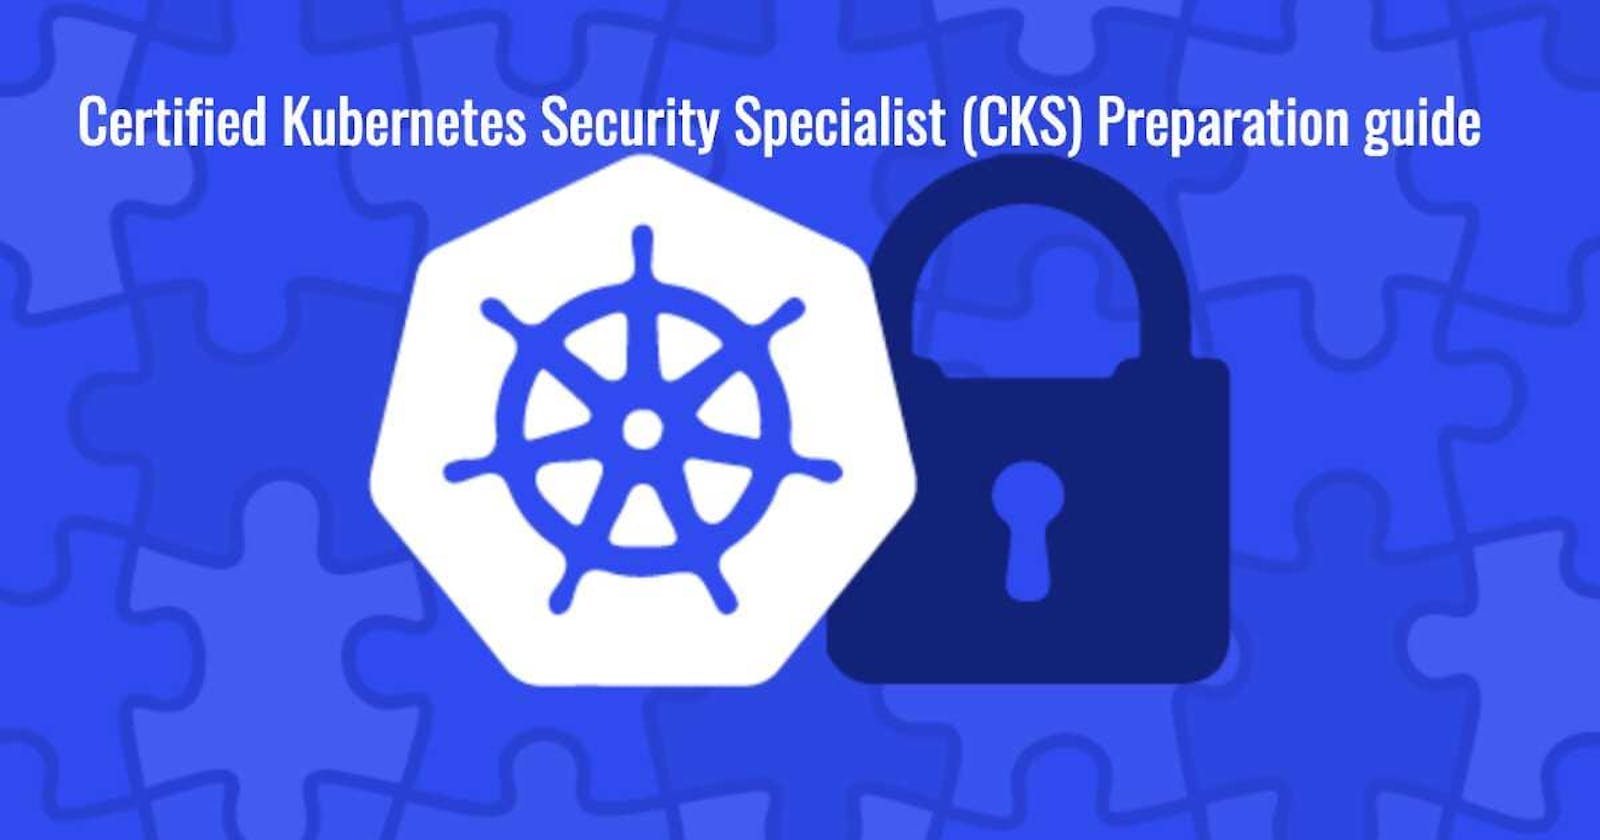 Certified Kubernetes Security Specialist (CKS) 2022 exam guide